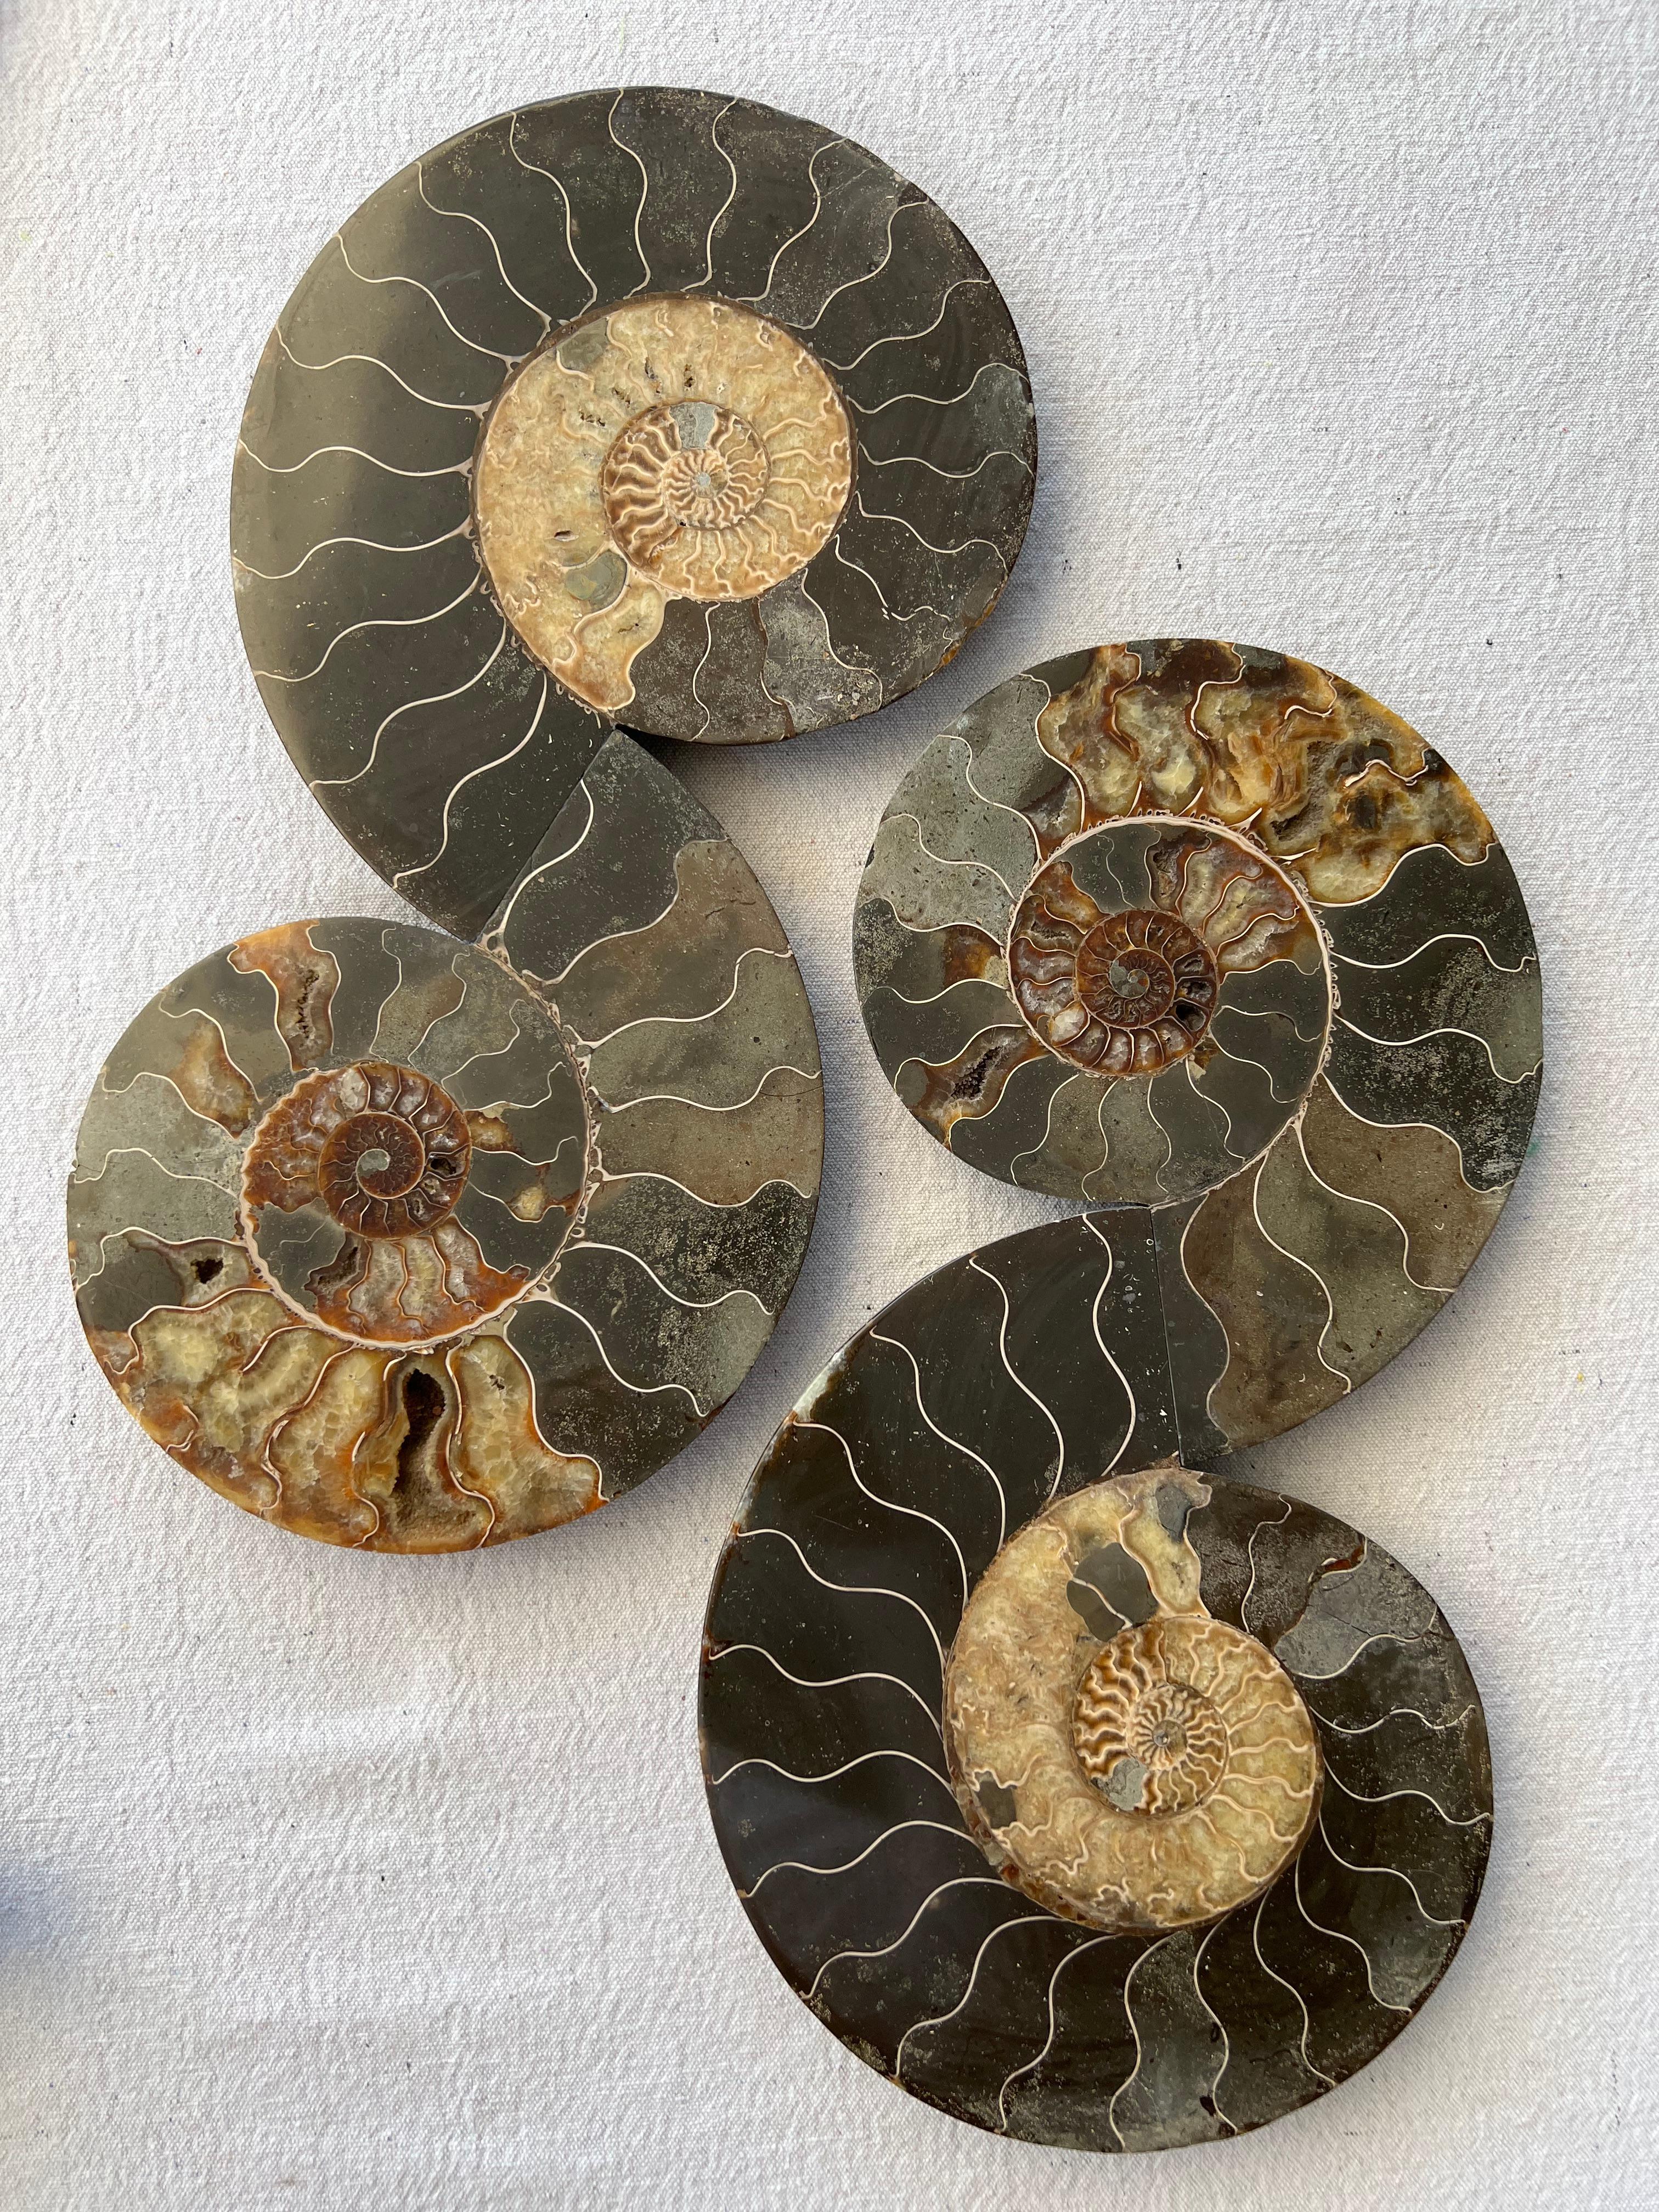 Ammonite convolutions sculptures by Mary brogger.
One of a kind. Signed with artist’s stamp.
Dimensions: Ø 19 x H 38 (each).
Materials: fossils, mixed media.
“Ammonite Convolutions” Unique sculpture series for table top. 2022. Size and price may